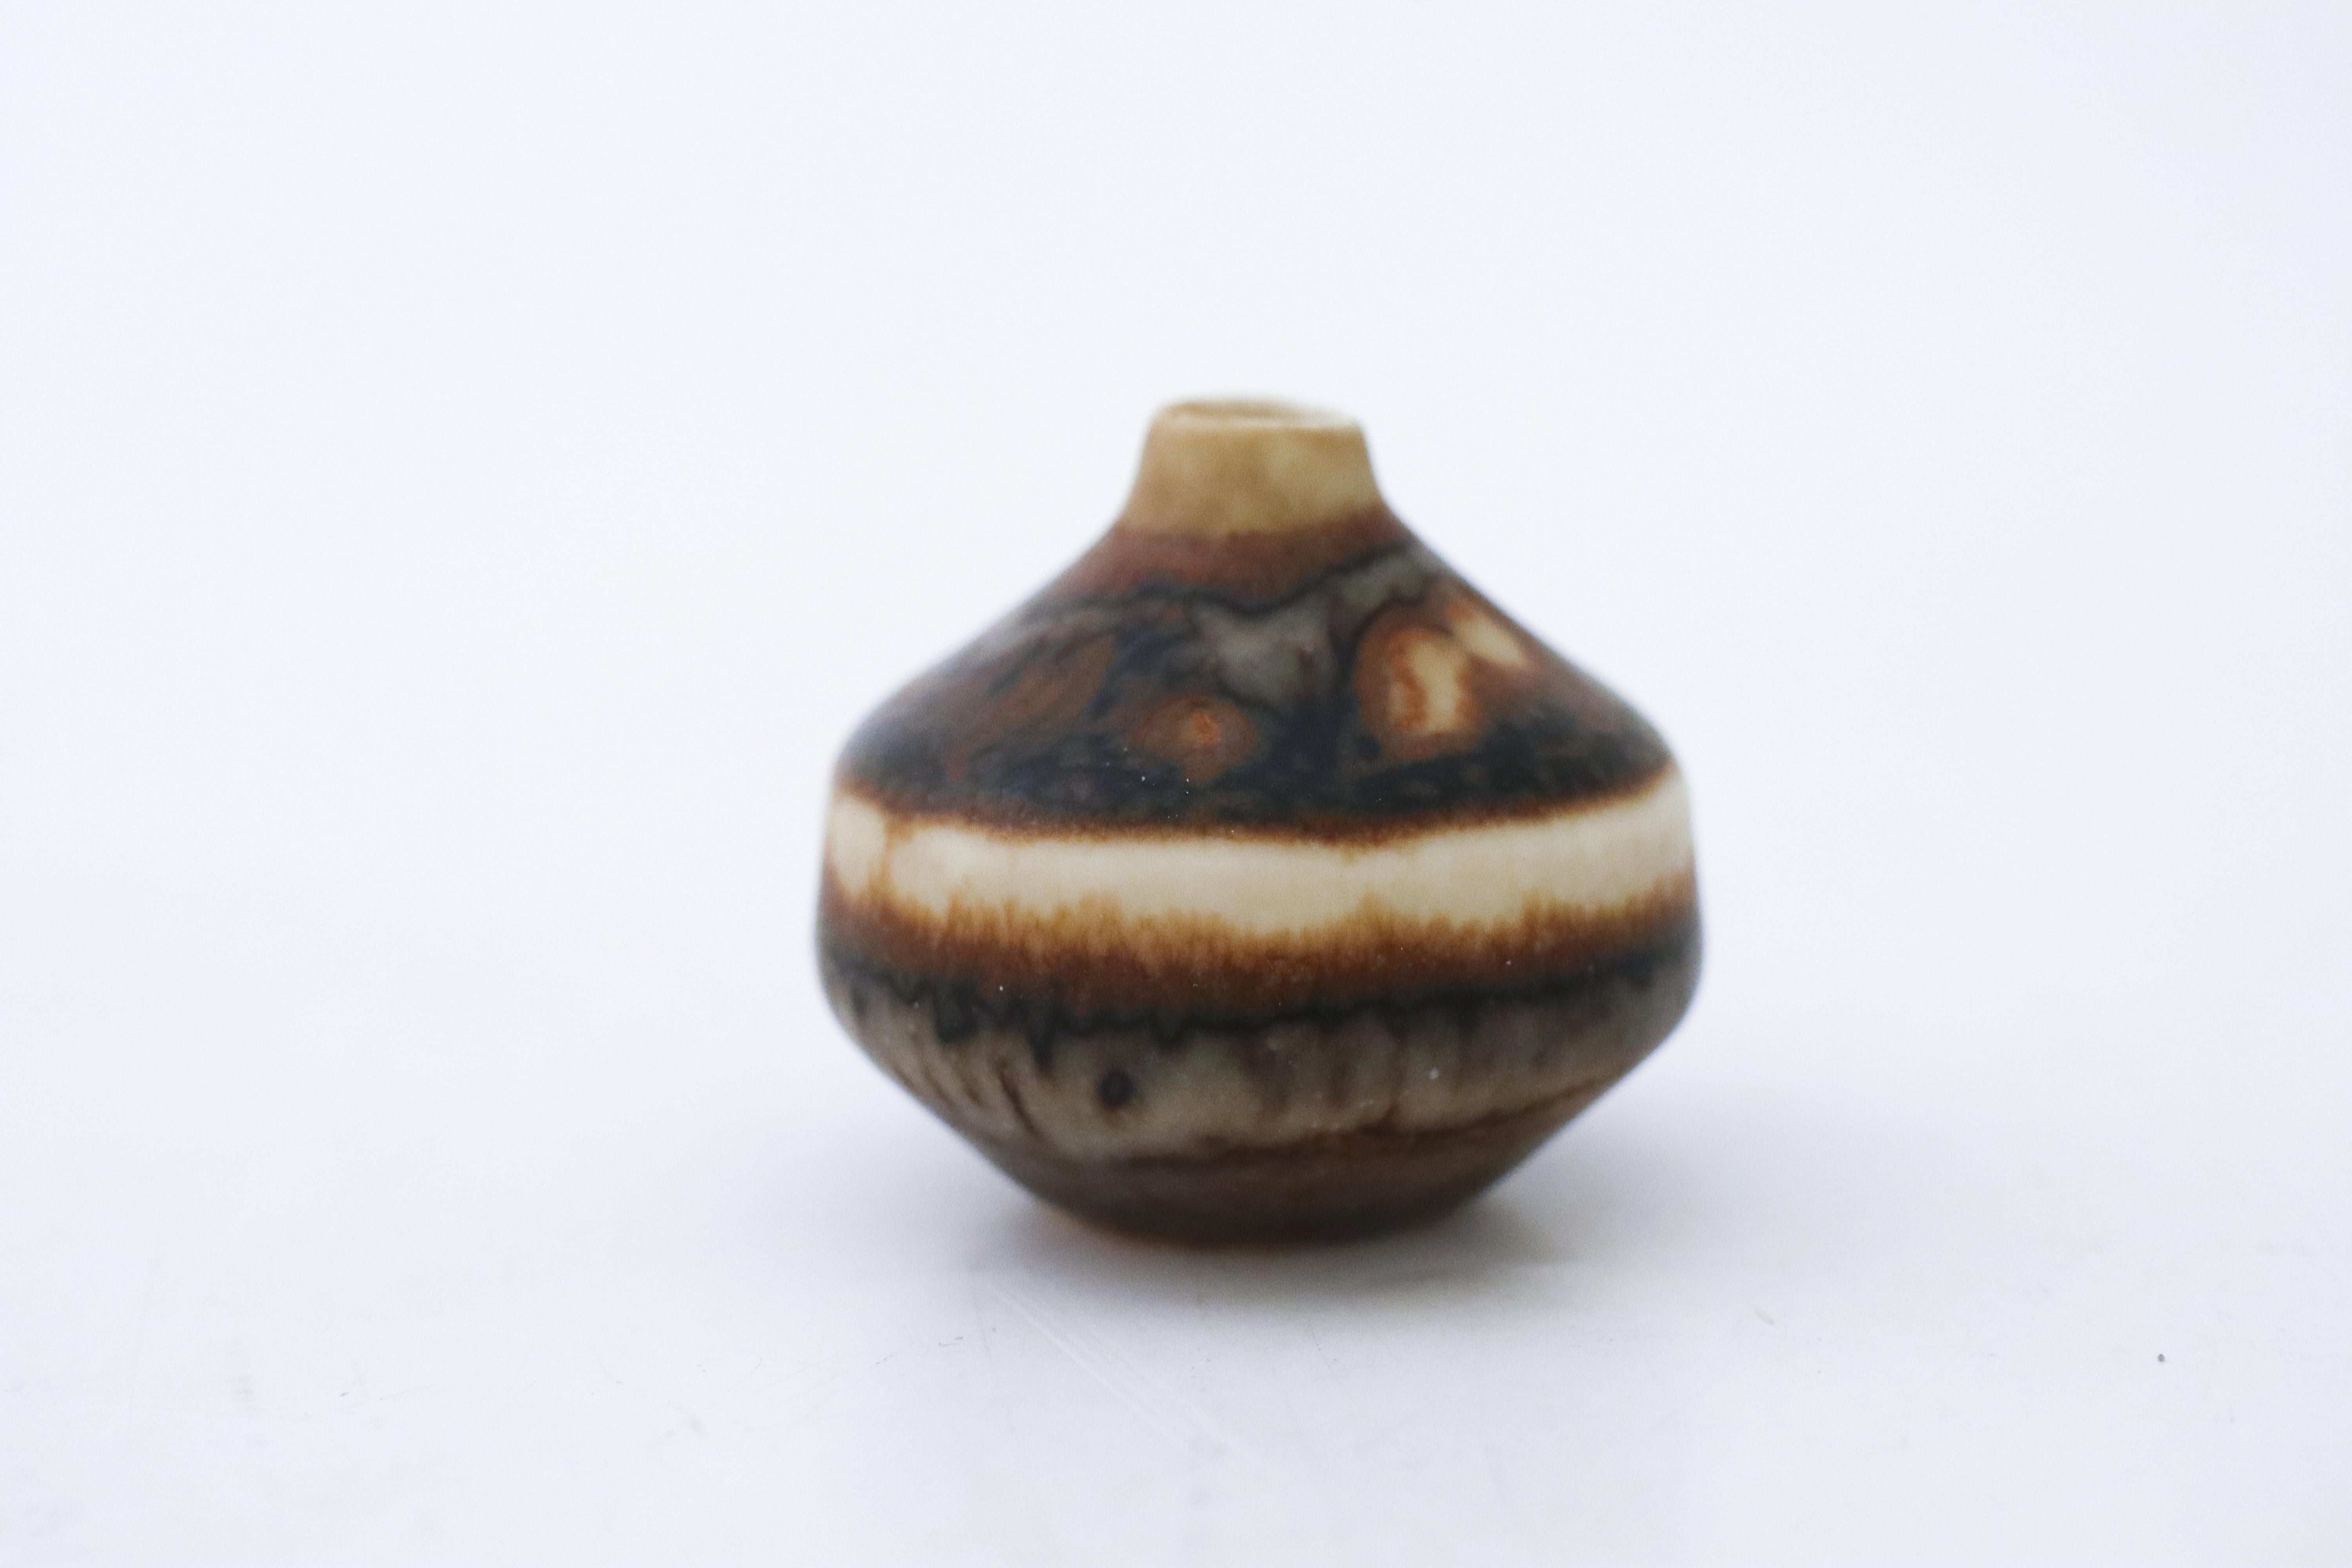 A brown miniature vase designed by Carl-Harry Stålhane at Rörstrand, it is 3.5 cm (1.4